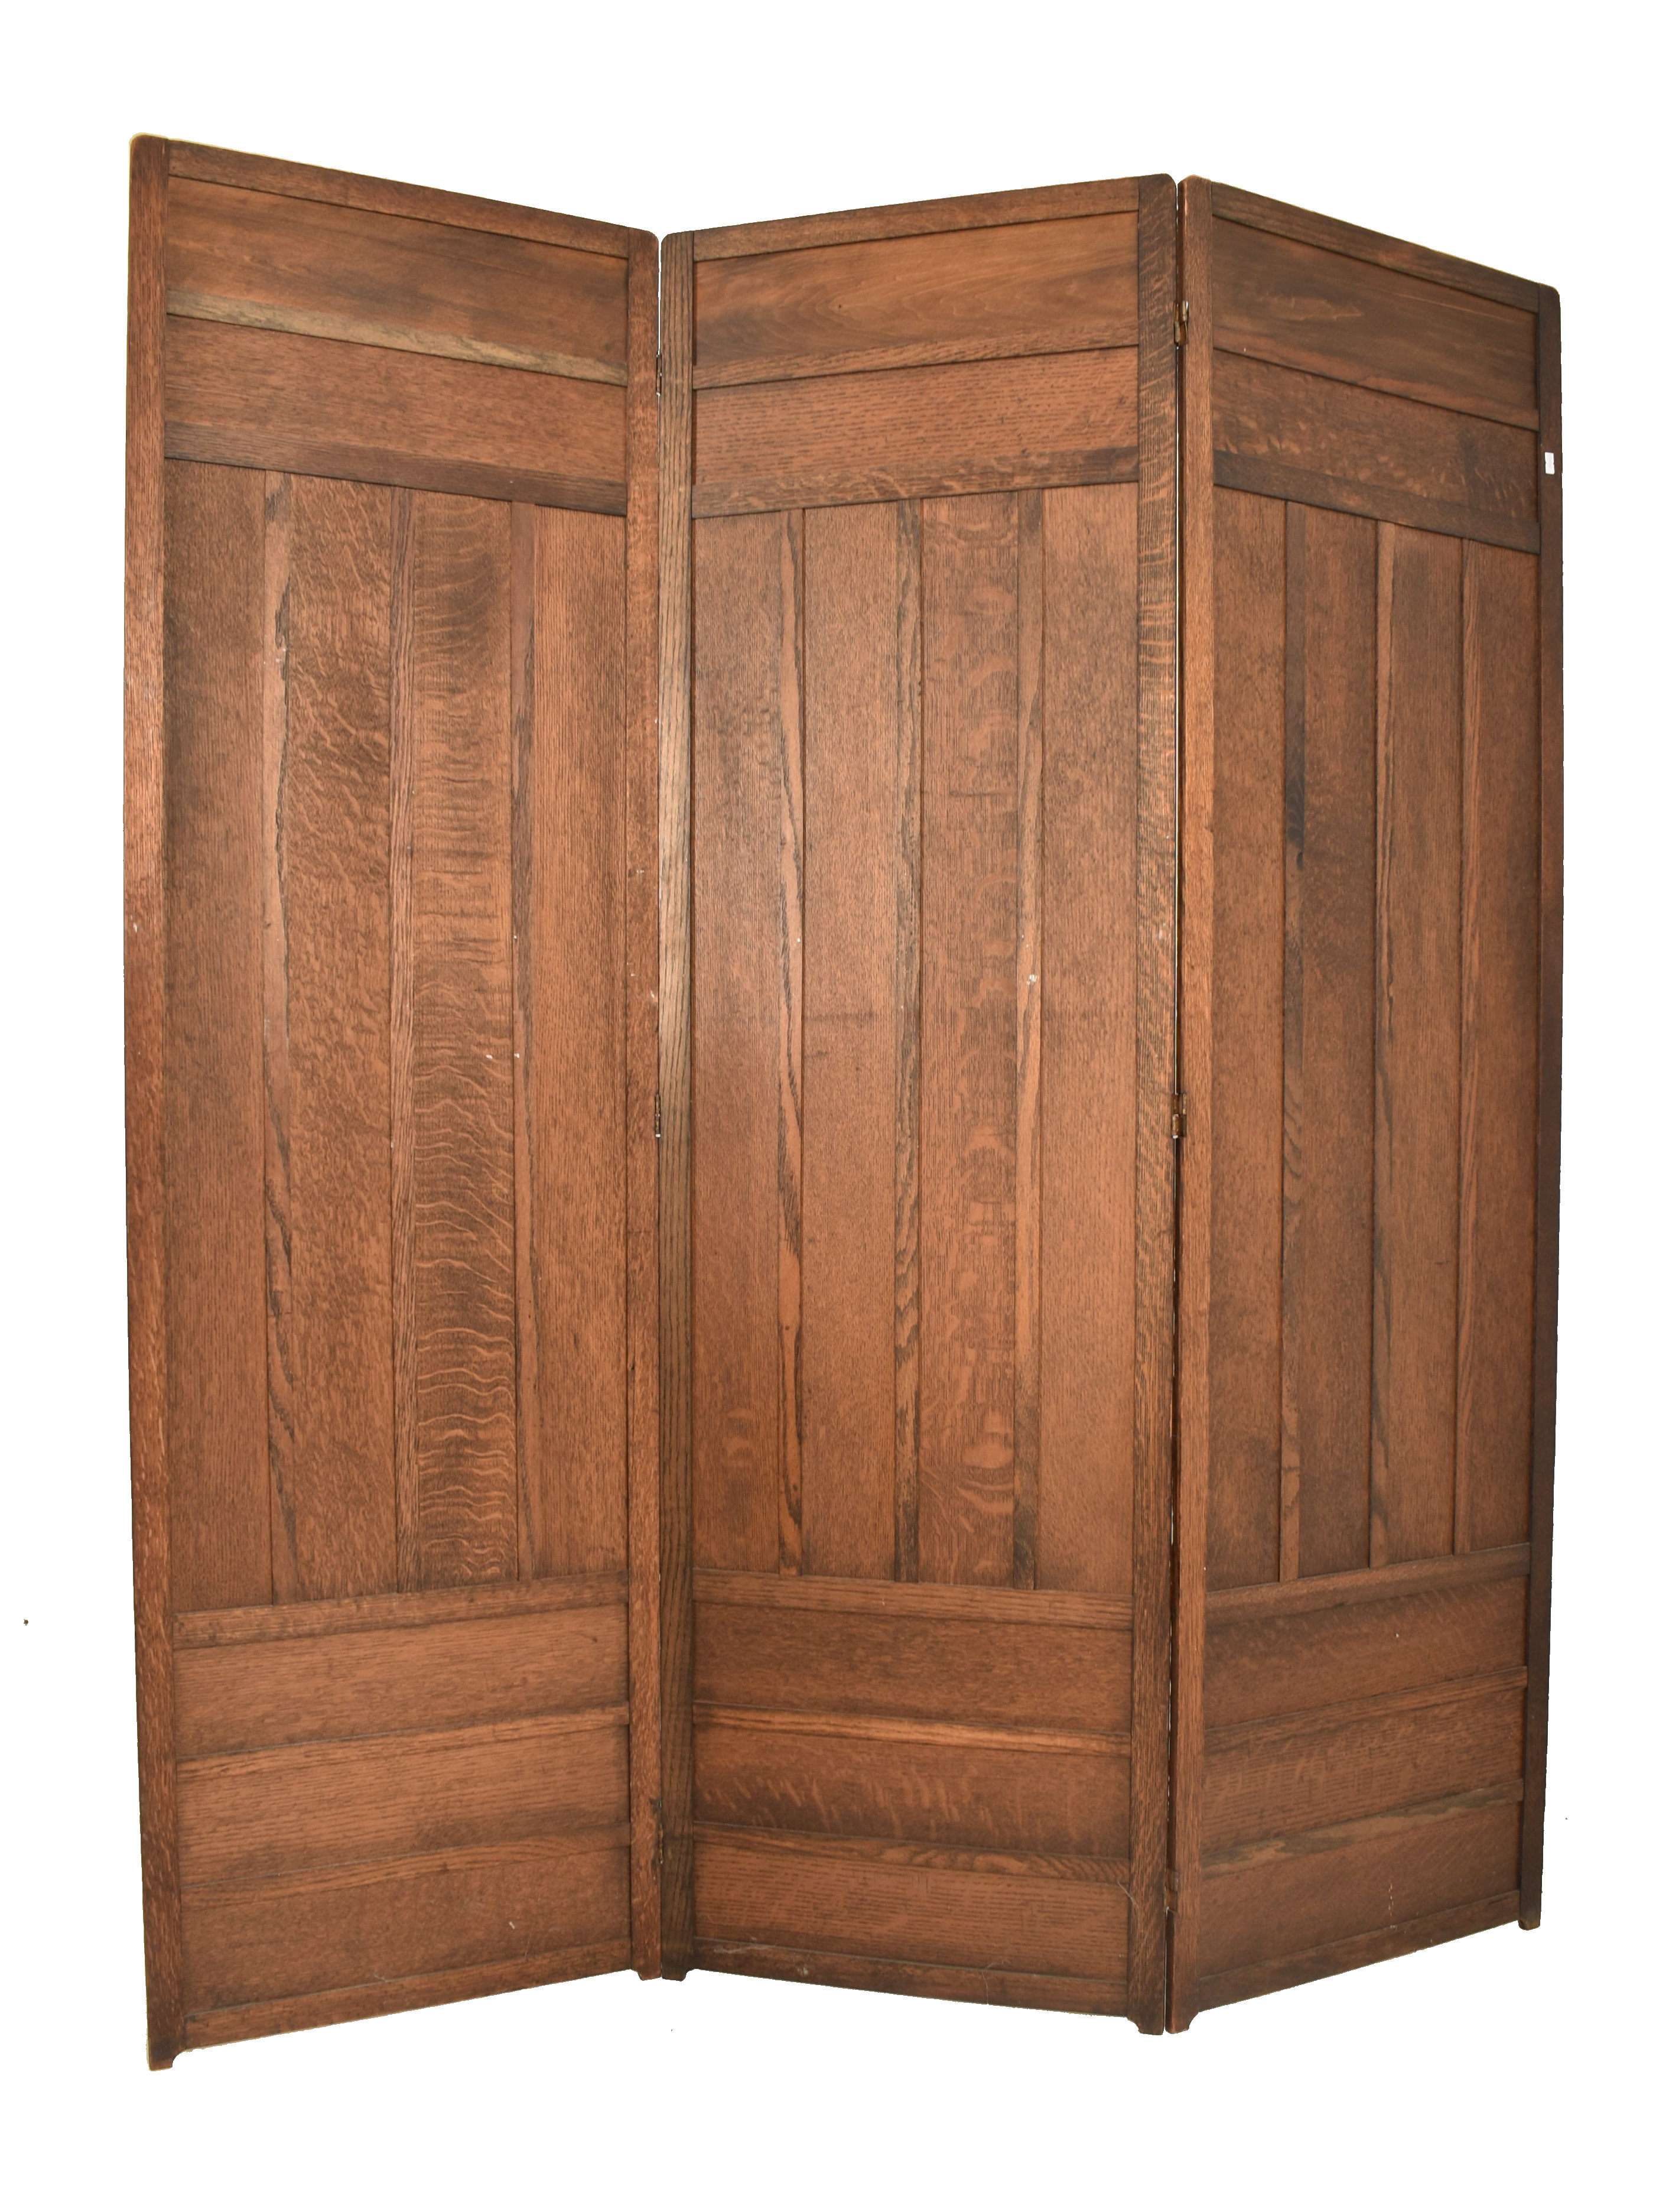 LATE 19TH CENTURY ARTS & CRAFTS LIBERTY & CO SCREEN - Image 5 of 6